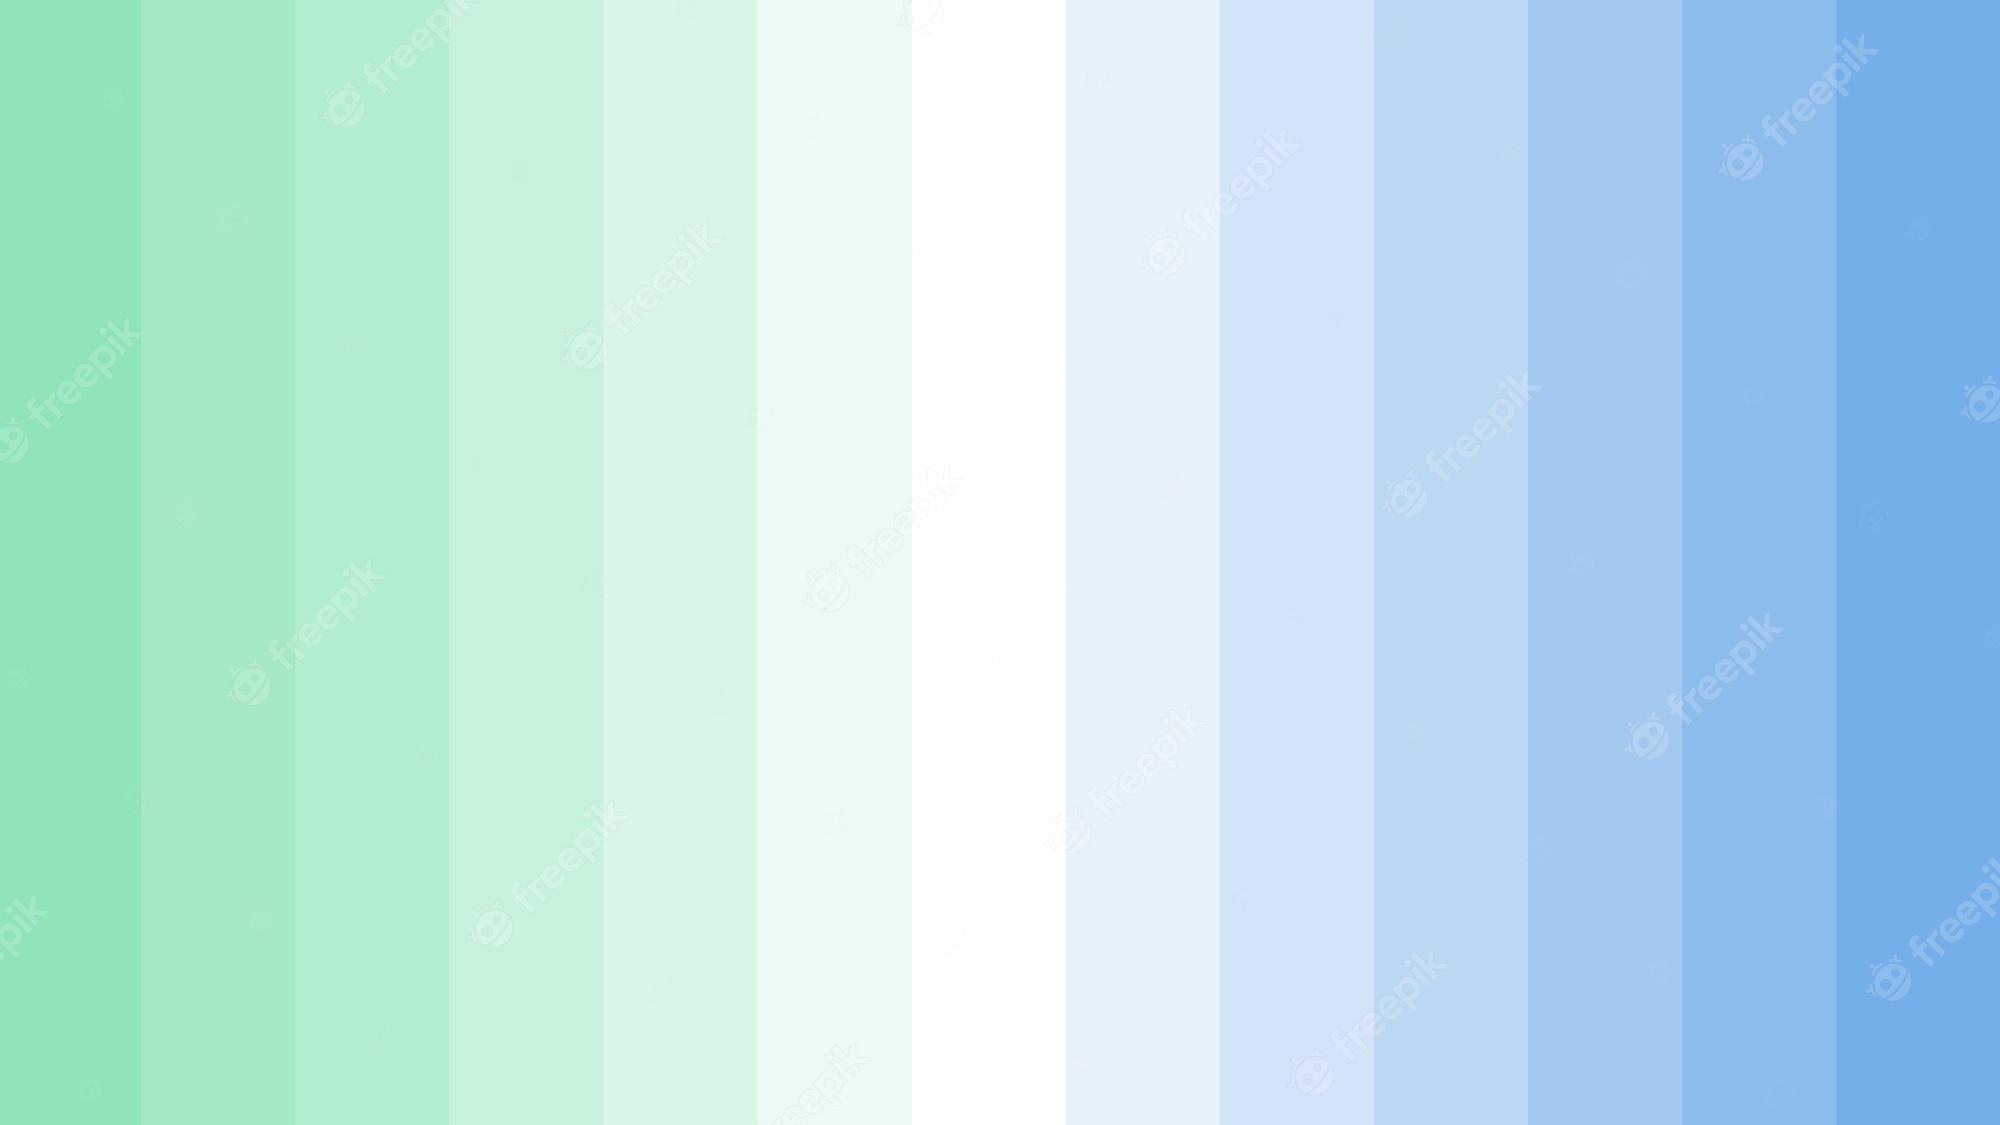 A colorful gradient background with blue, green and white stripes - Pastel green